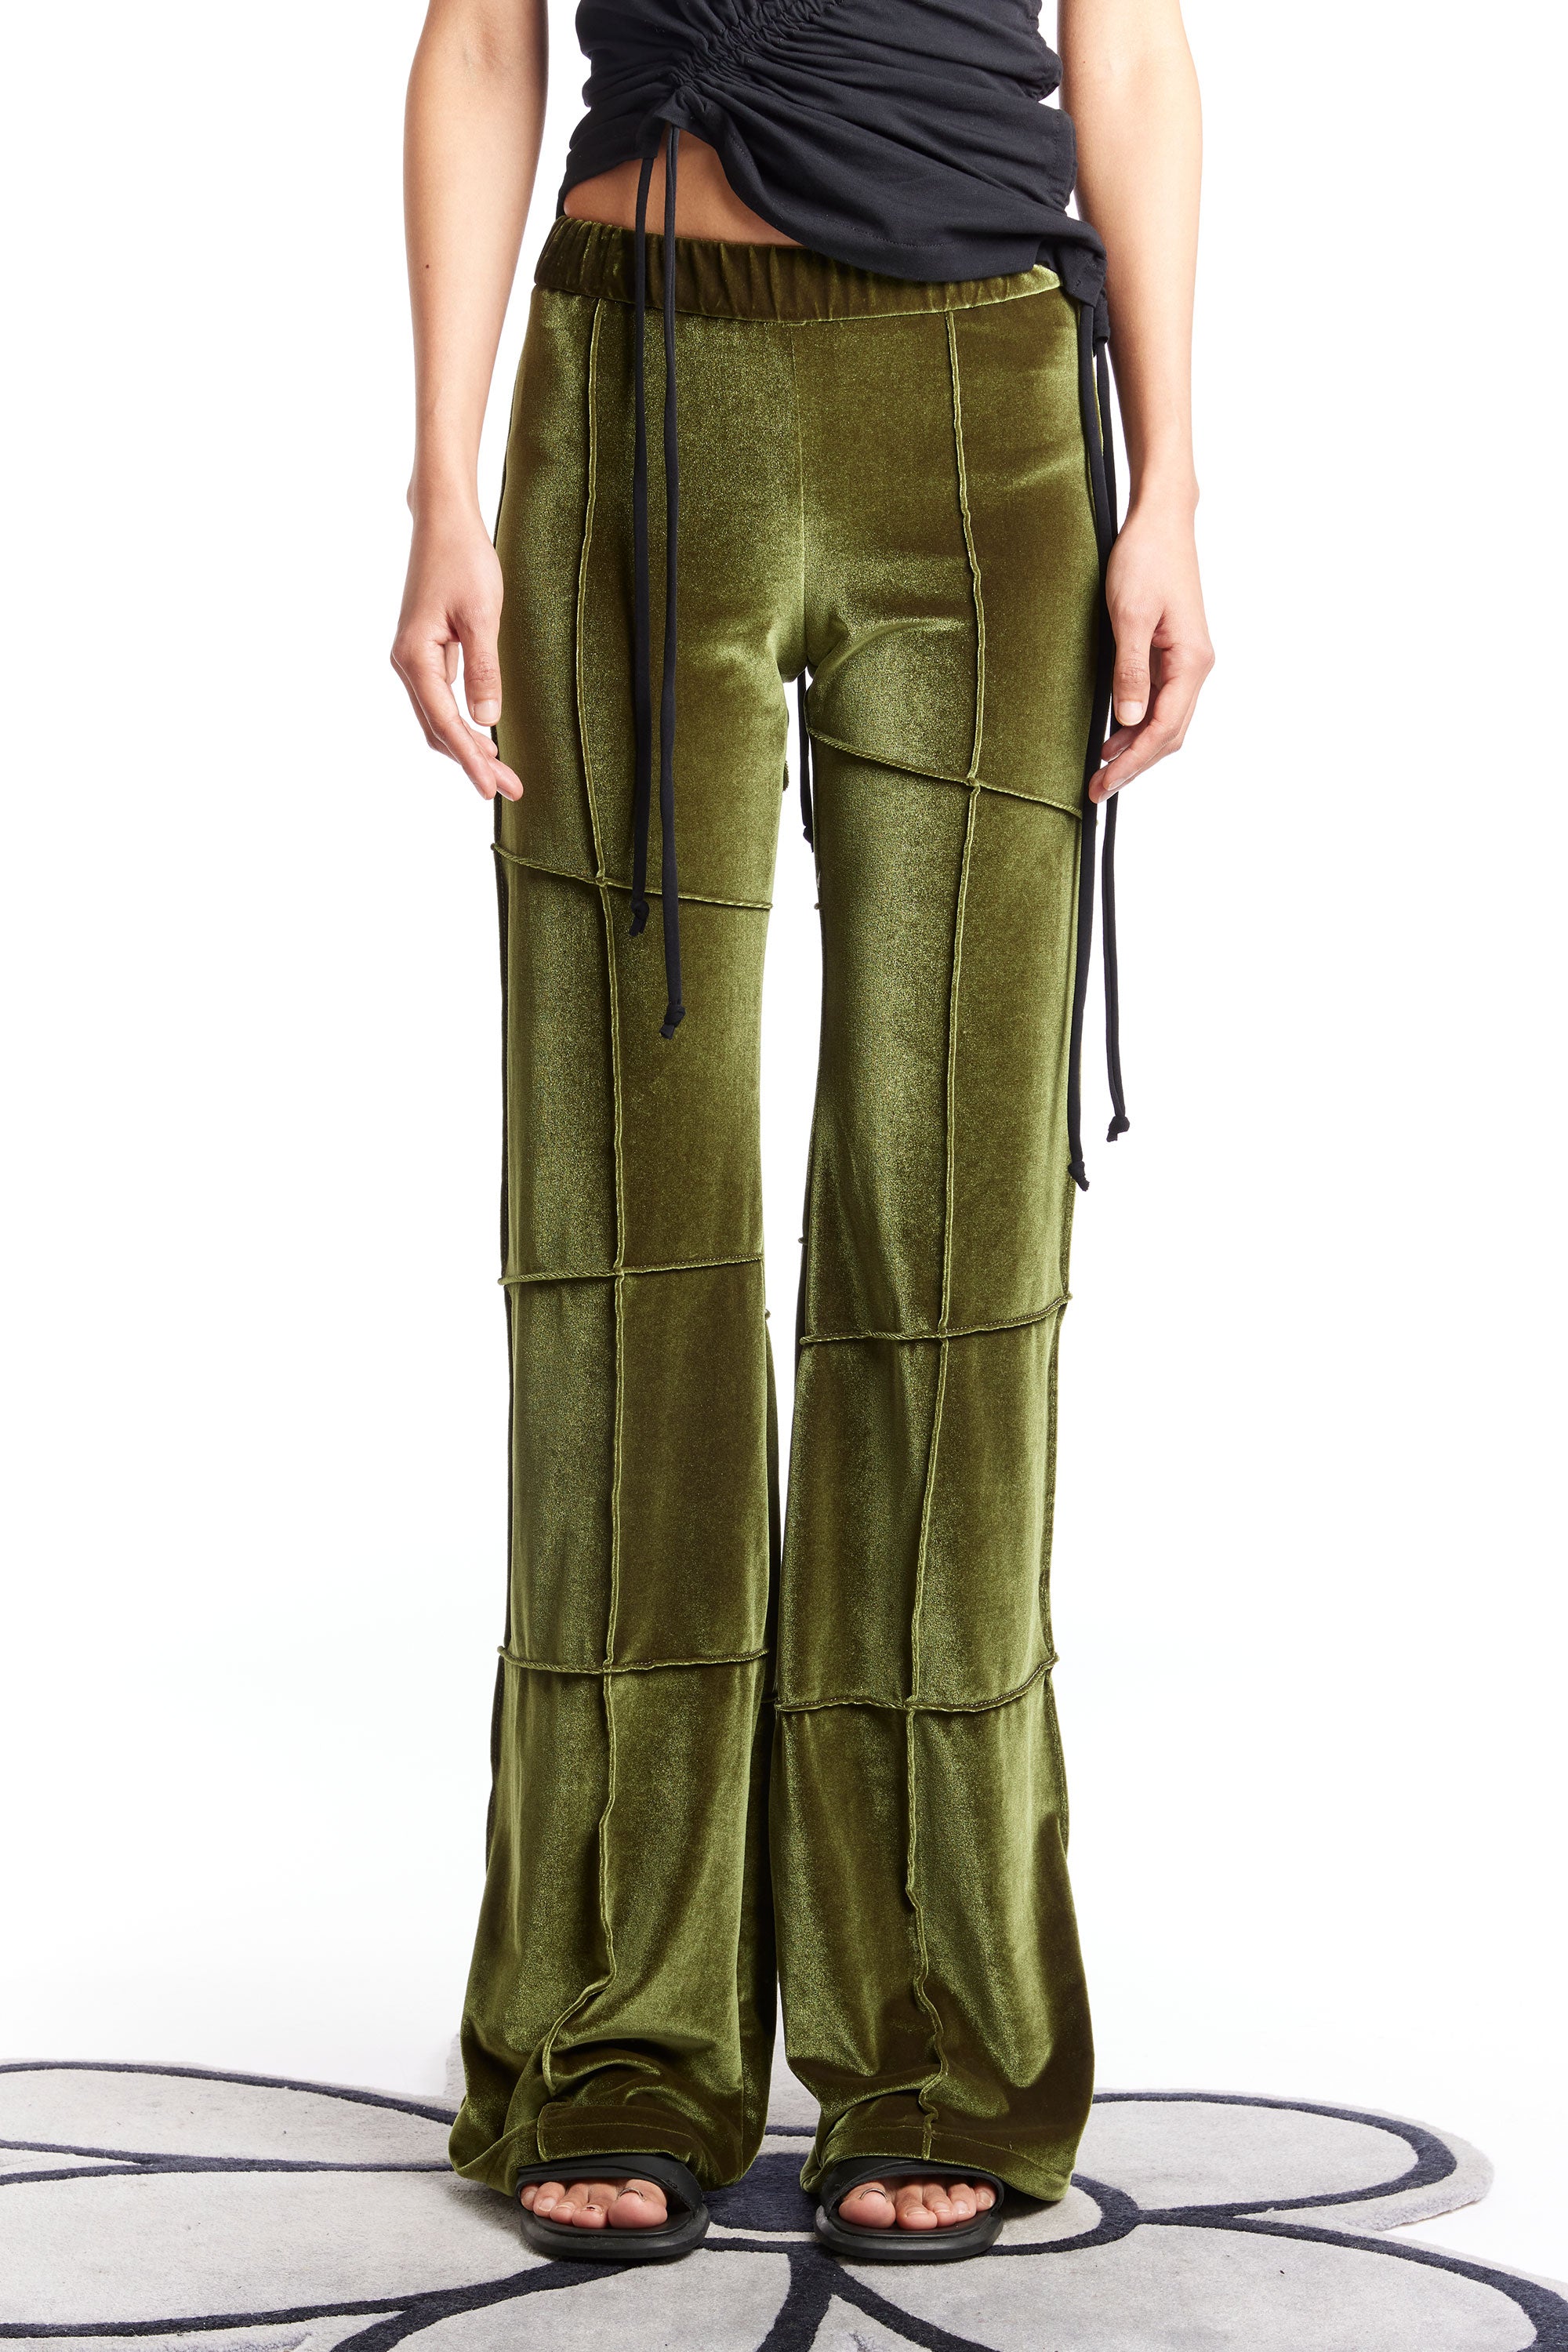 The KARLA LAIDLAW - SPIDER PANT FLARE OLIVE  available online with global shipping, and in PAM Stores Melbourne and Sydney.